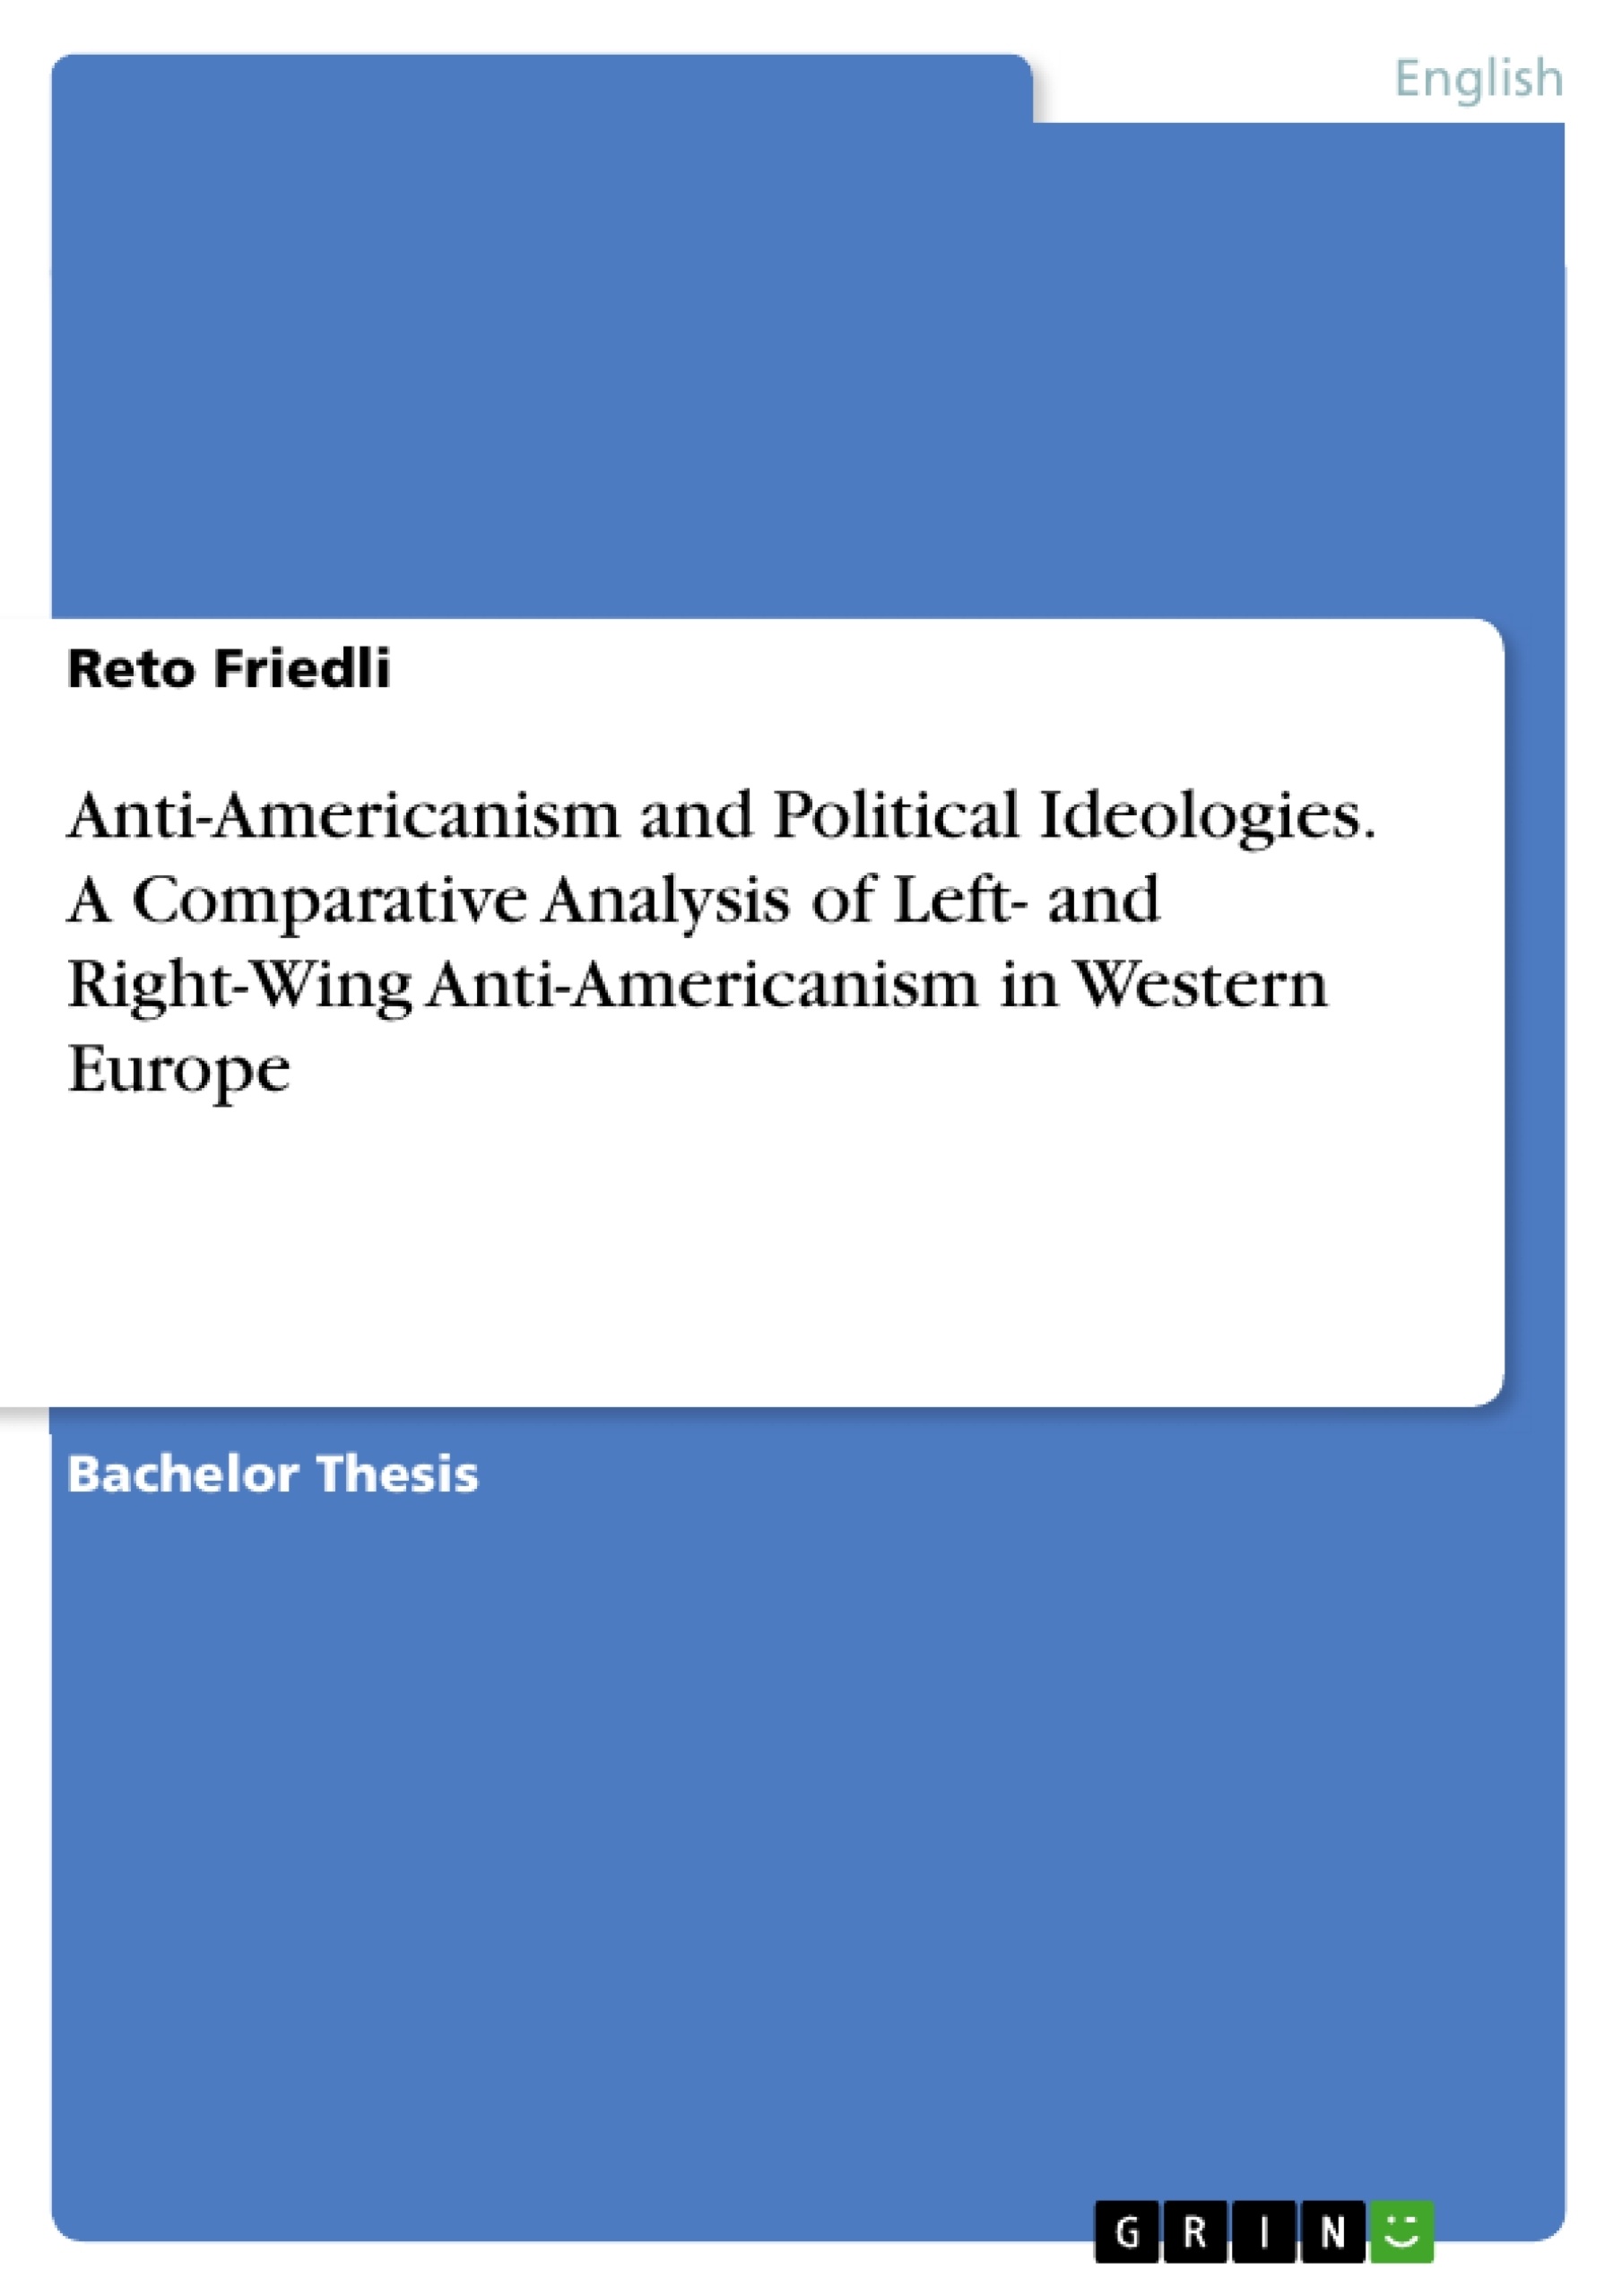 Title: Anti-Americanism and Political Ideologies. A Comparative Analysis of Left- and Right-Wing Anti-Americanism in Western Europe